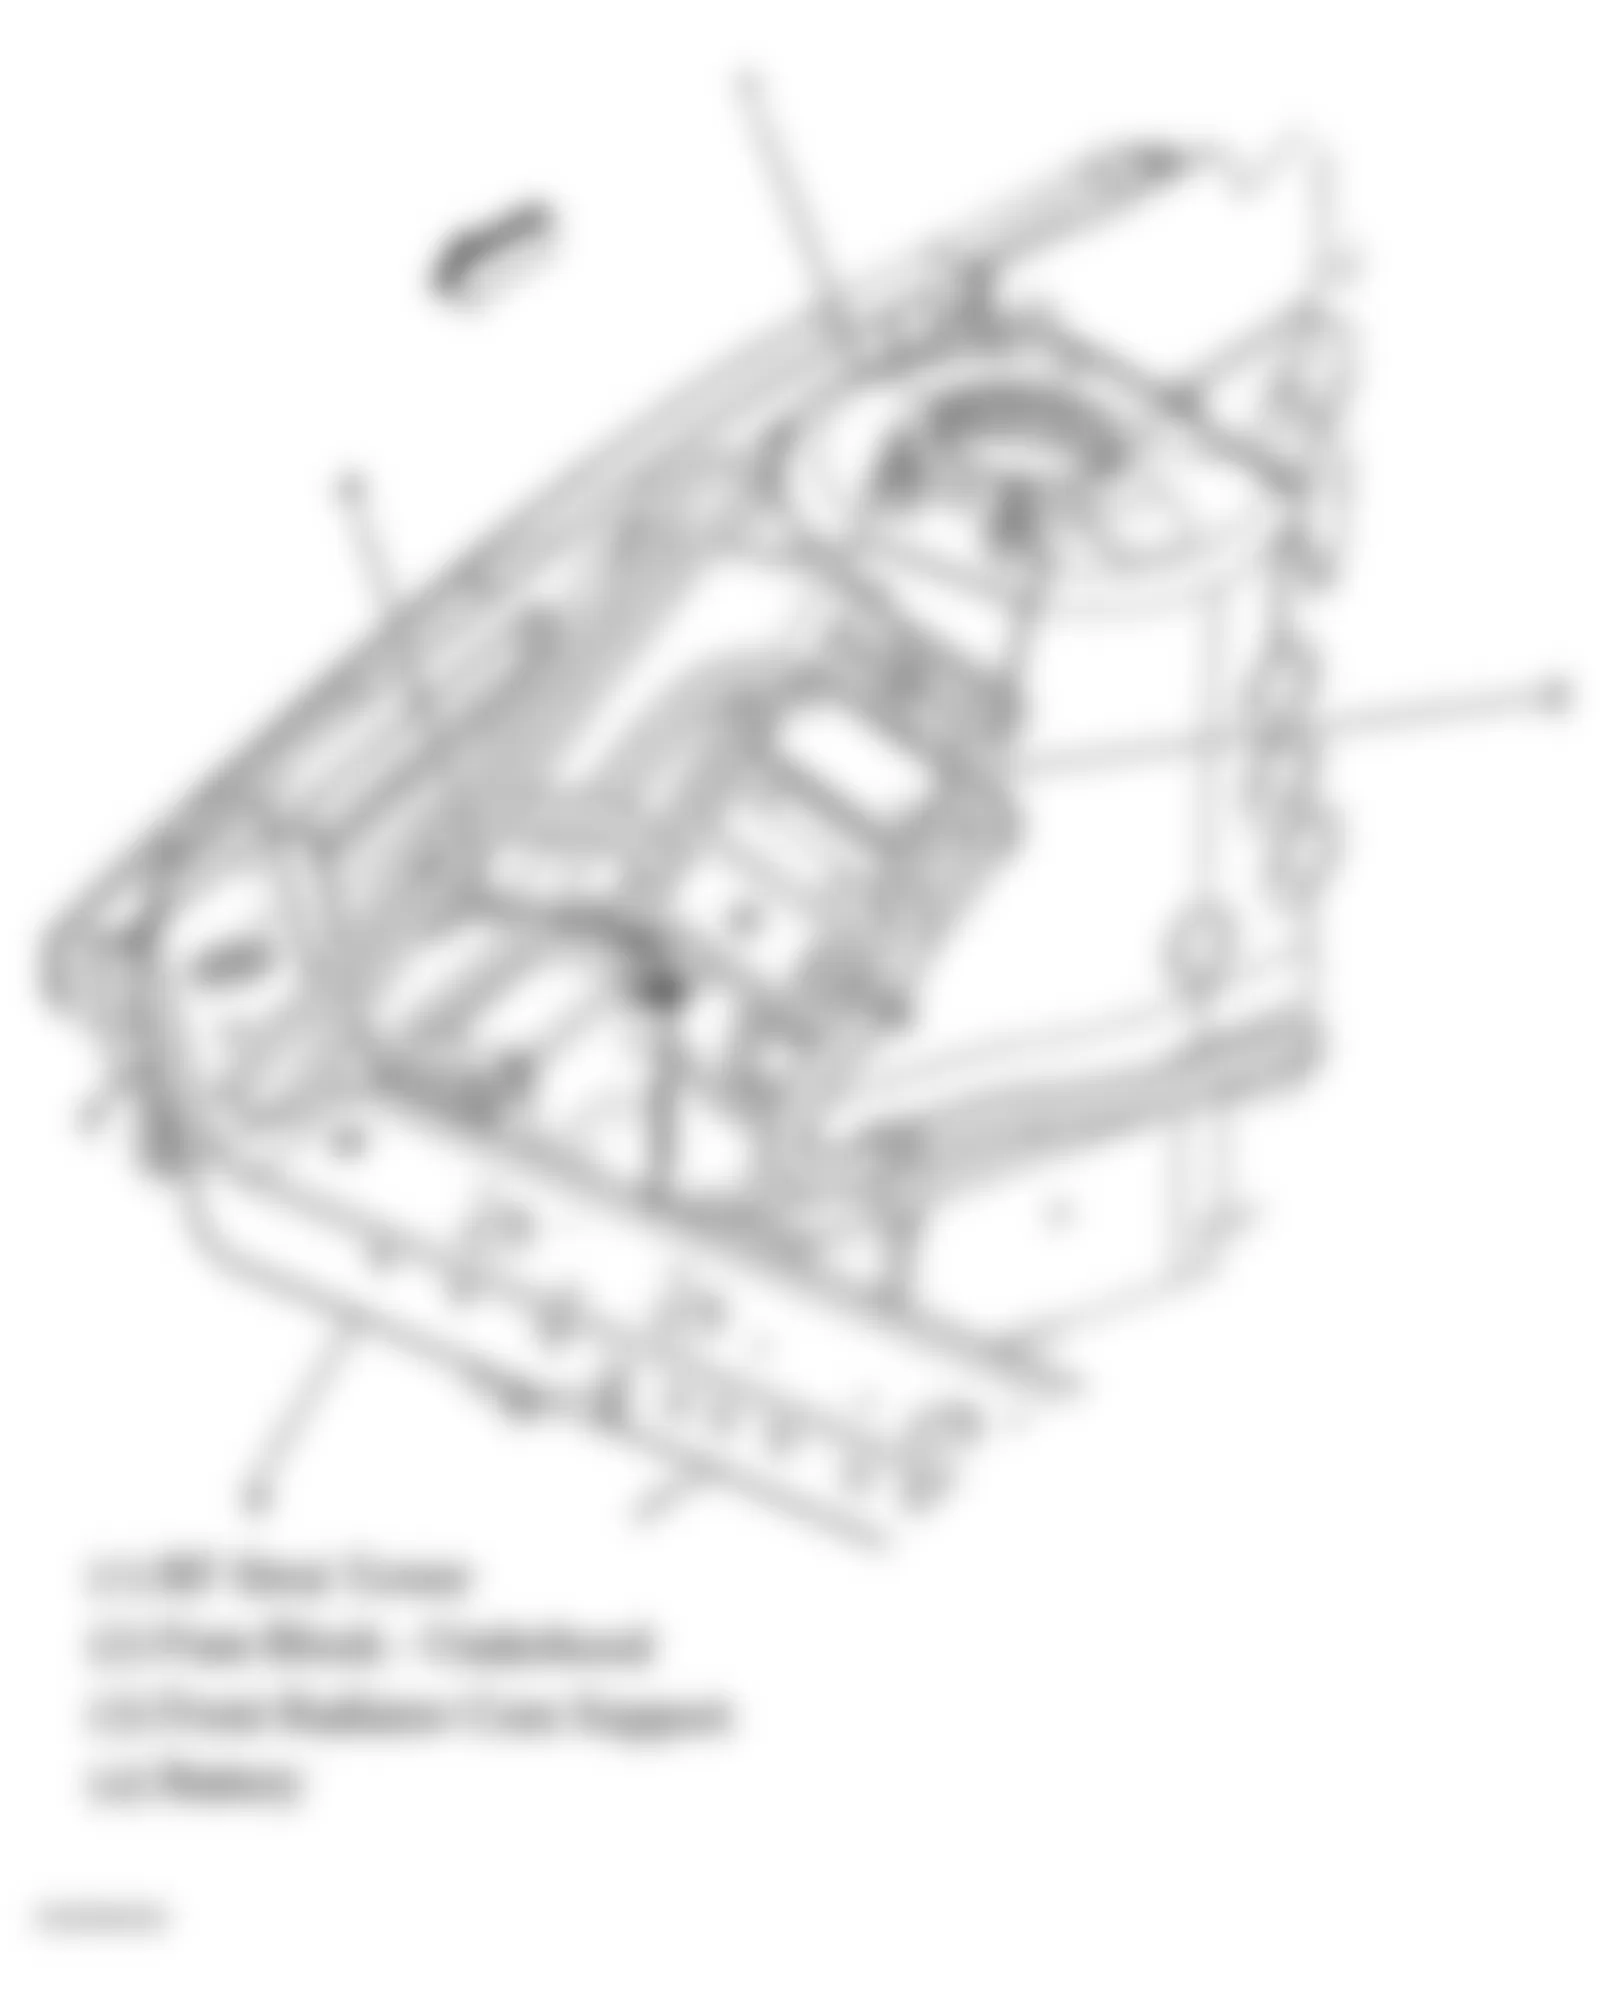 Buick LaCrosse CXL 2005 - Component Locations -  Right Front Of Engine Compartment